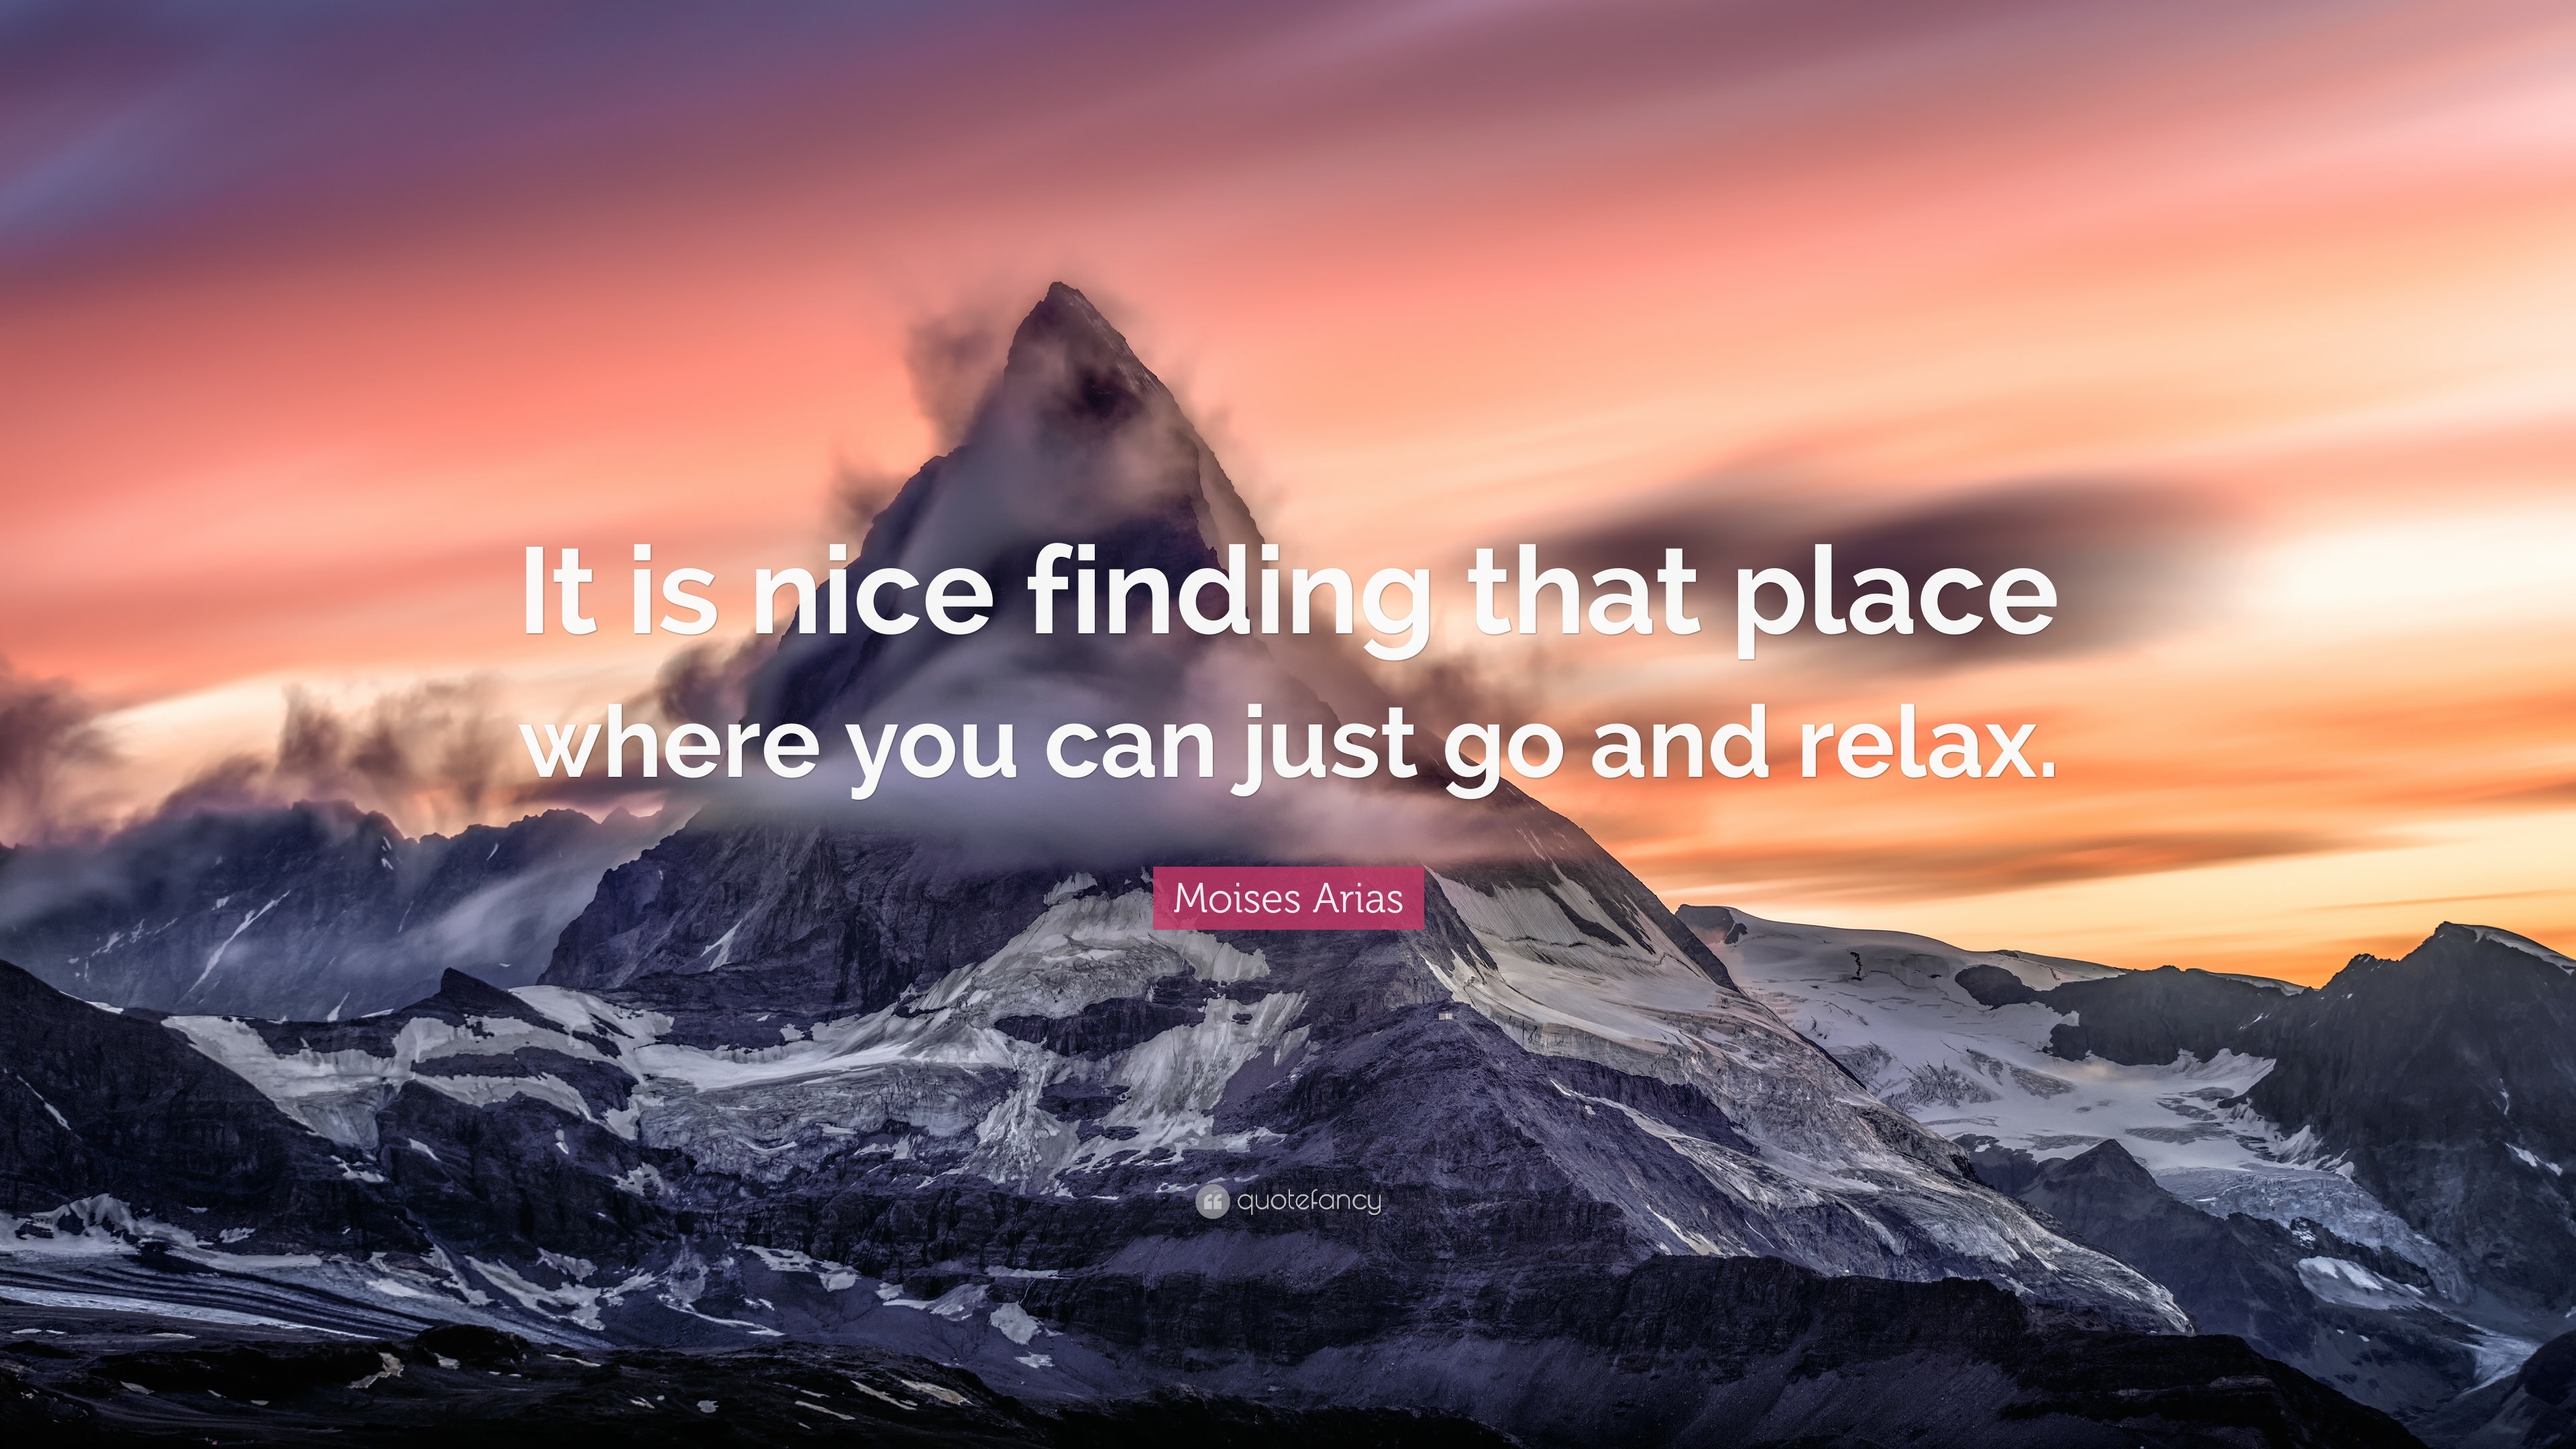 Moises Arias Quote: “It is nice finding that place where you can